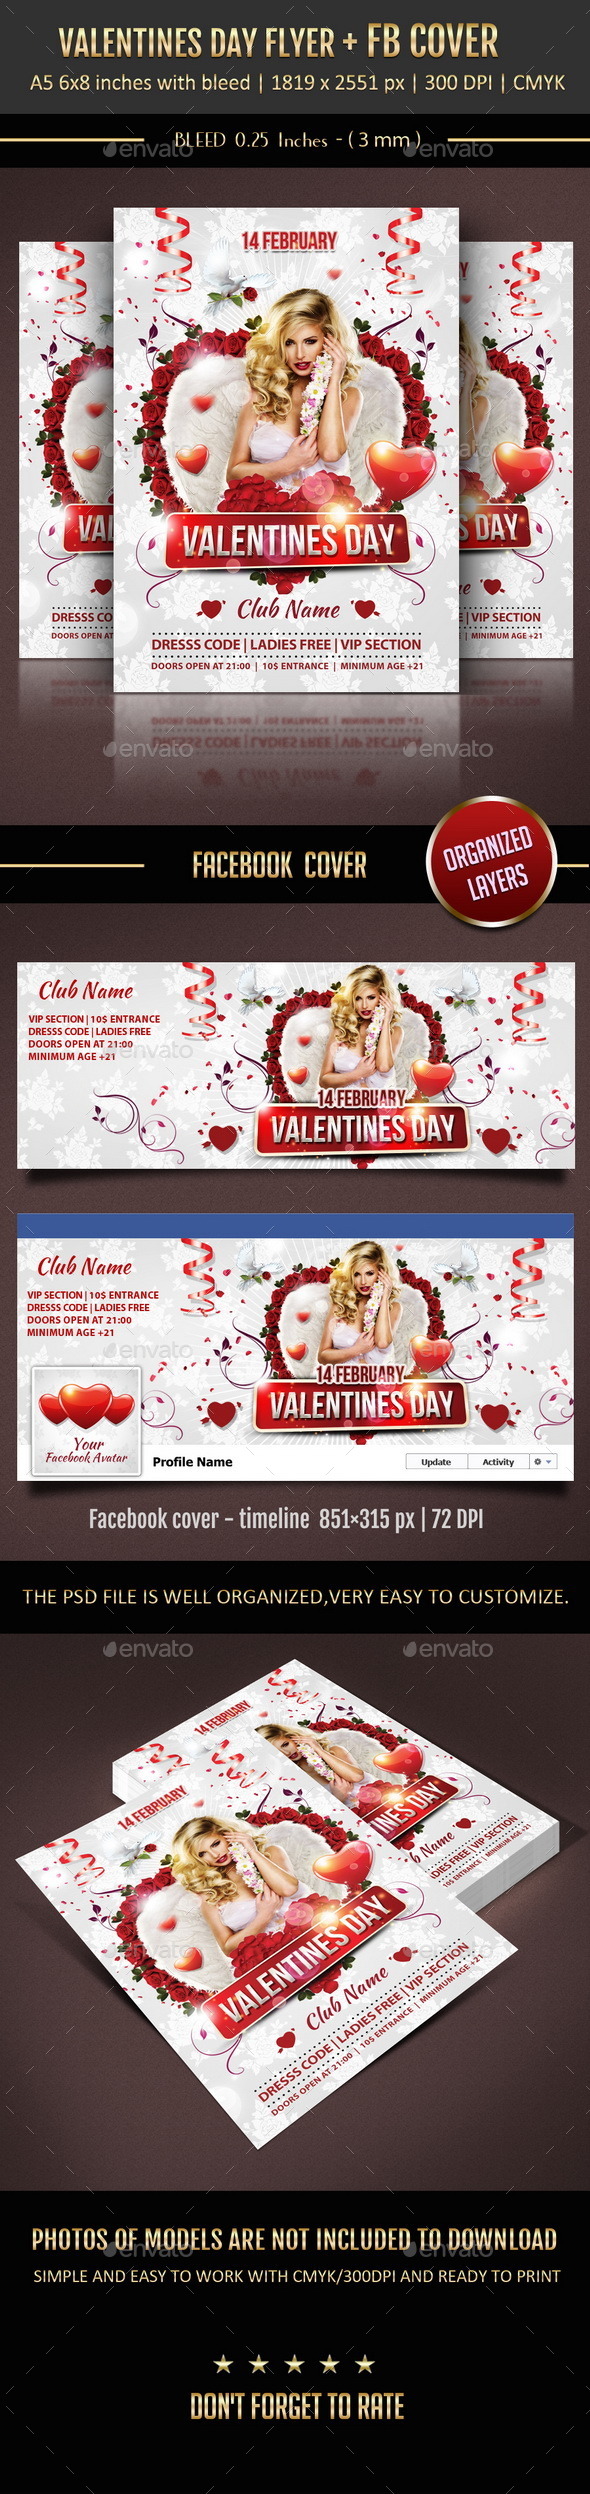 Valentines Day Flyer + Facebook Cover